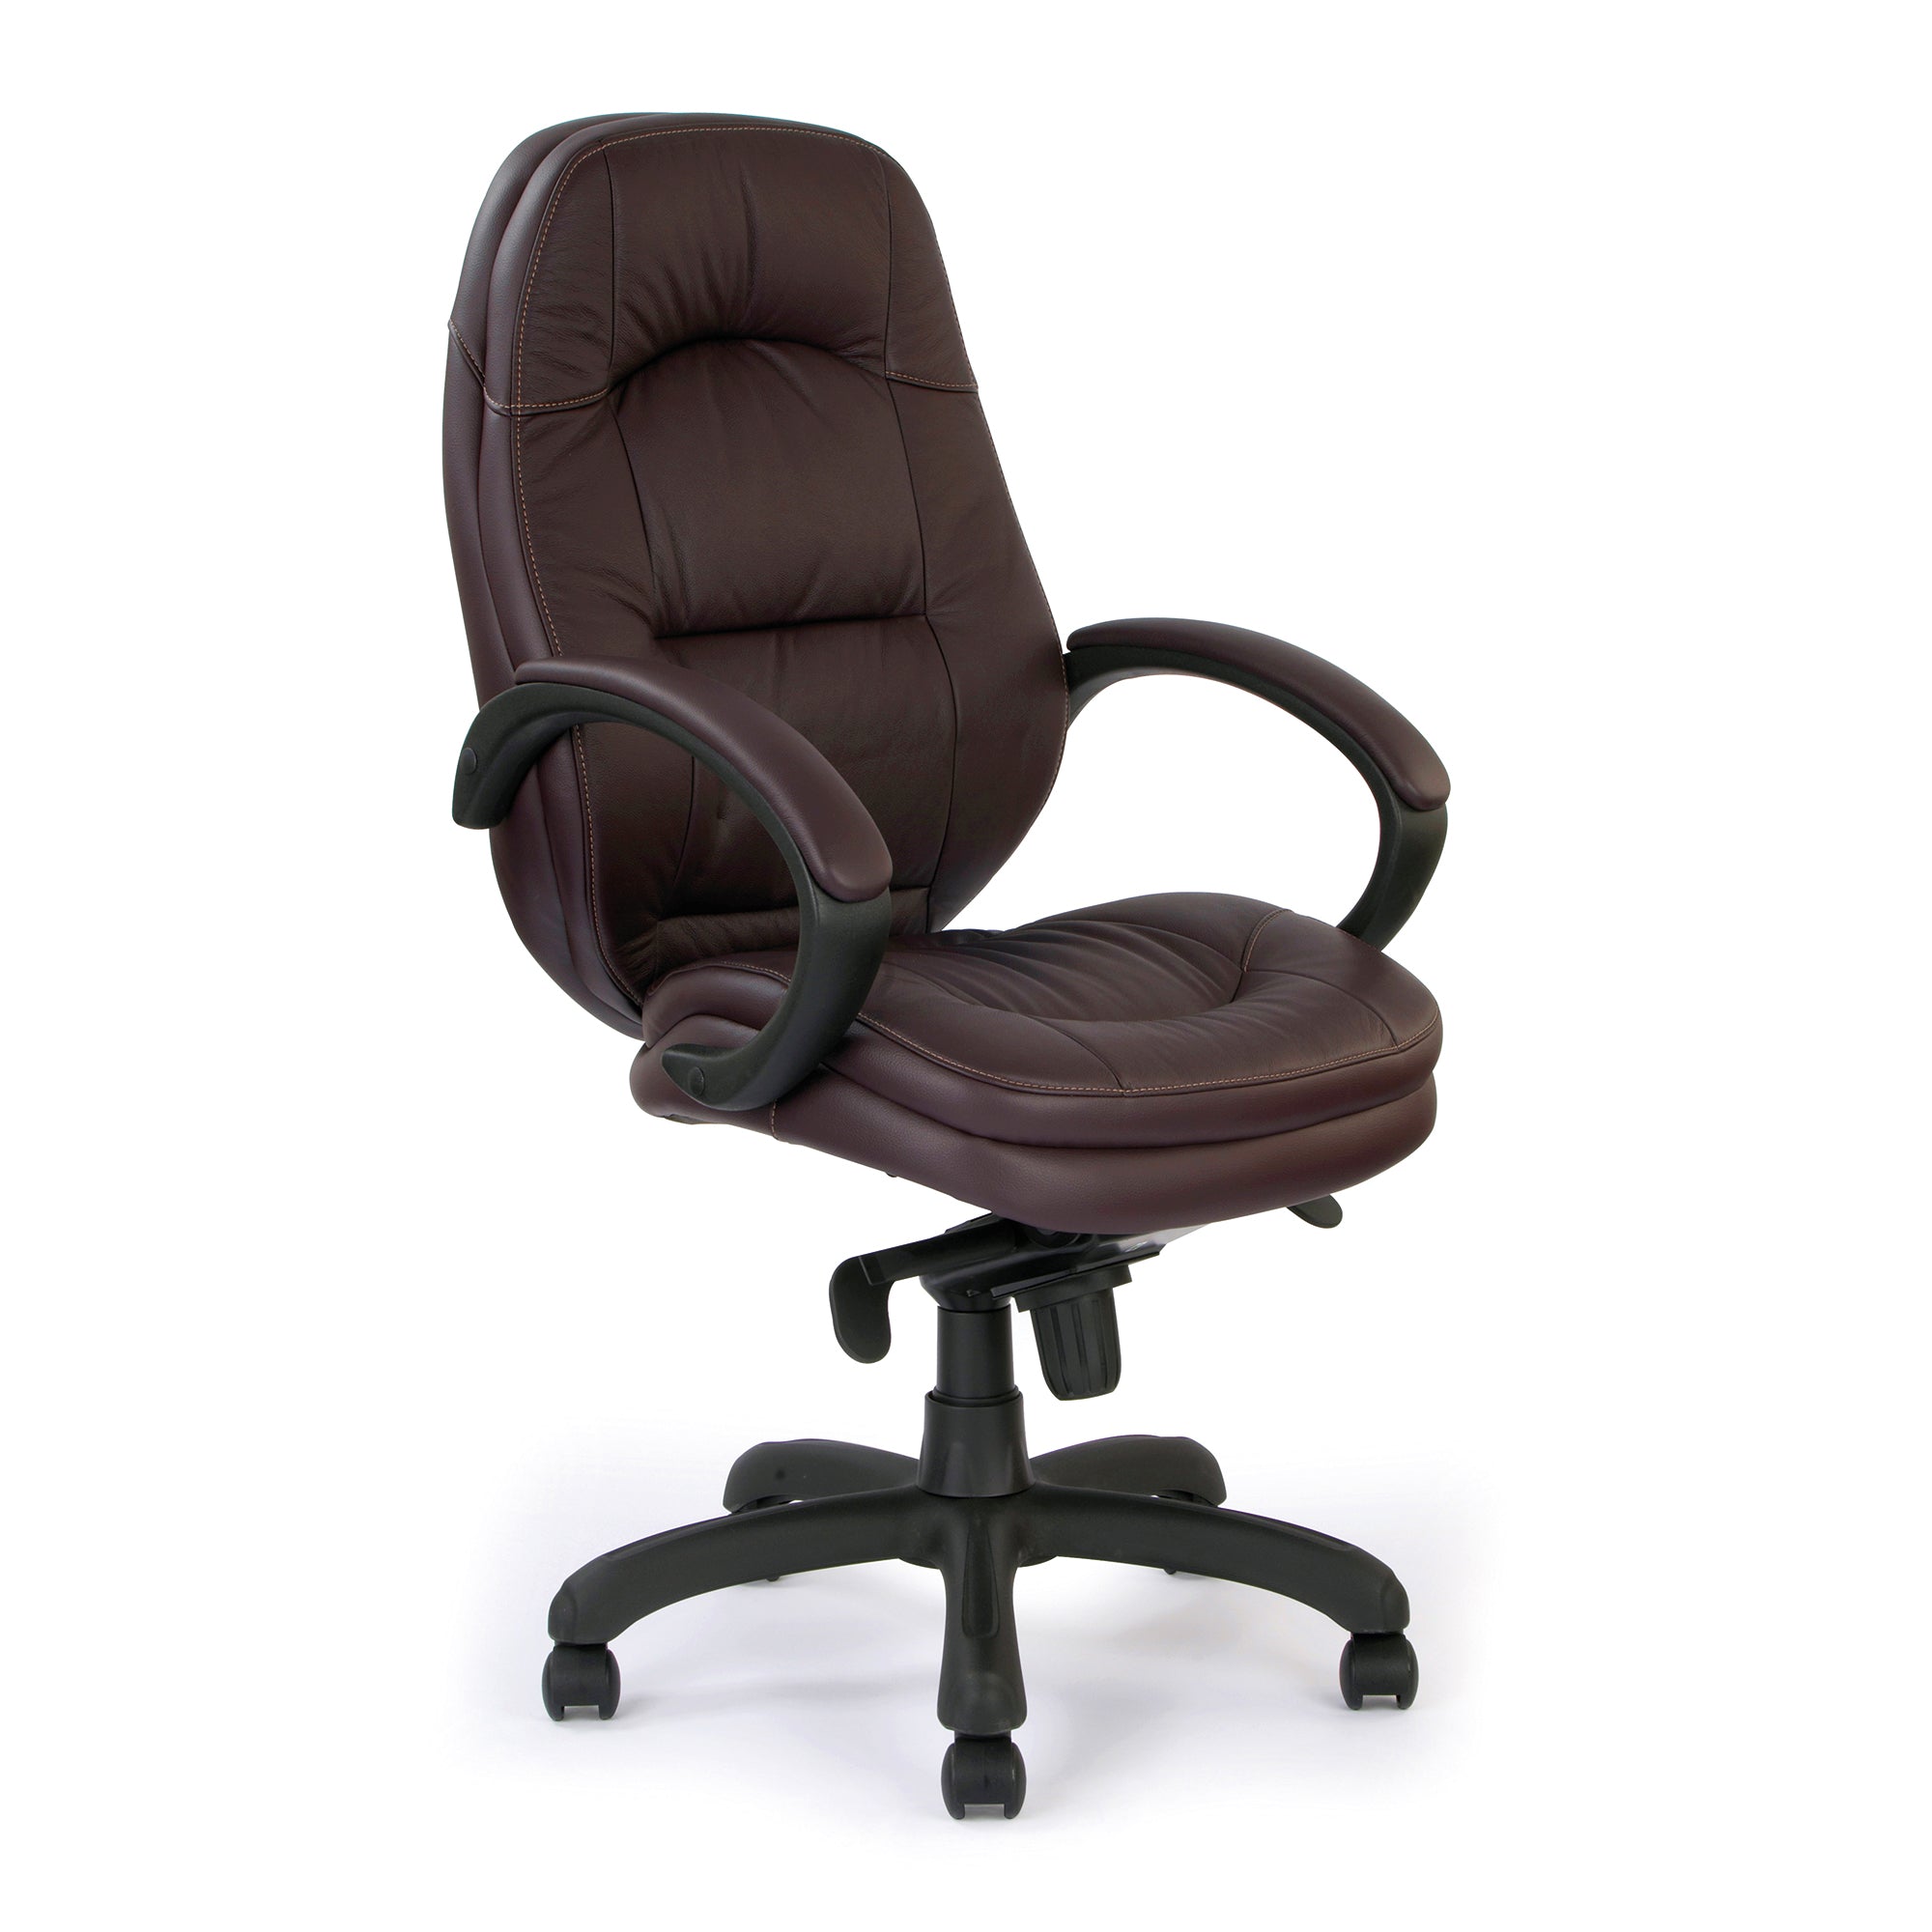 Brighton – Luxurious Leather Faced Executive Armchair with Padded, Upholstered Armpads and Pronounced Lumbar Support